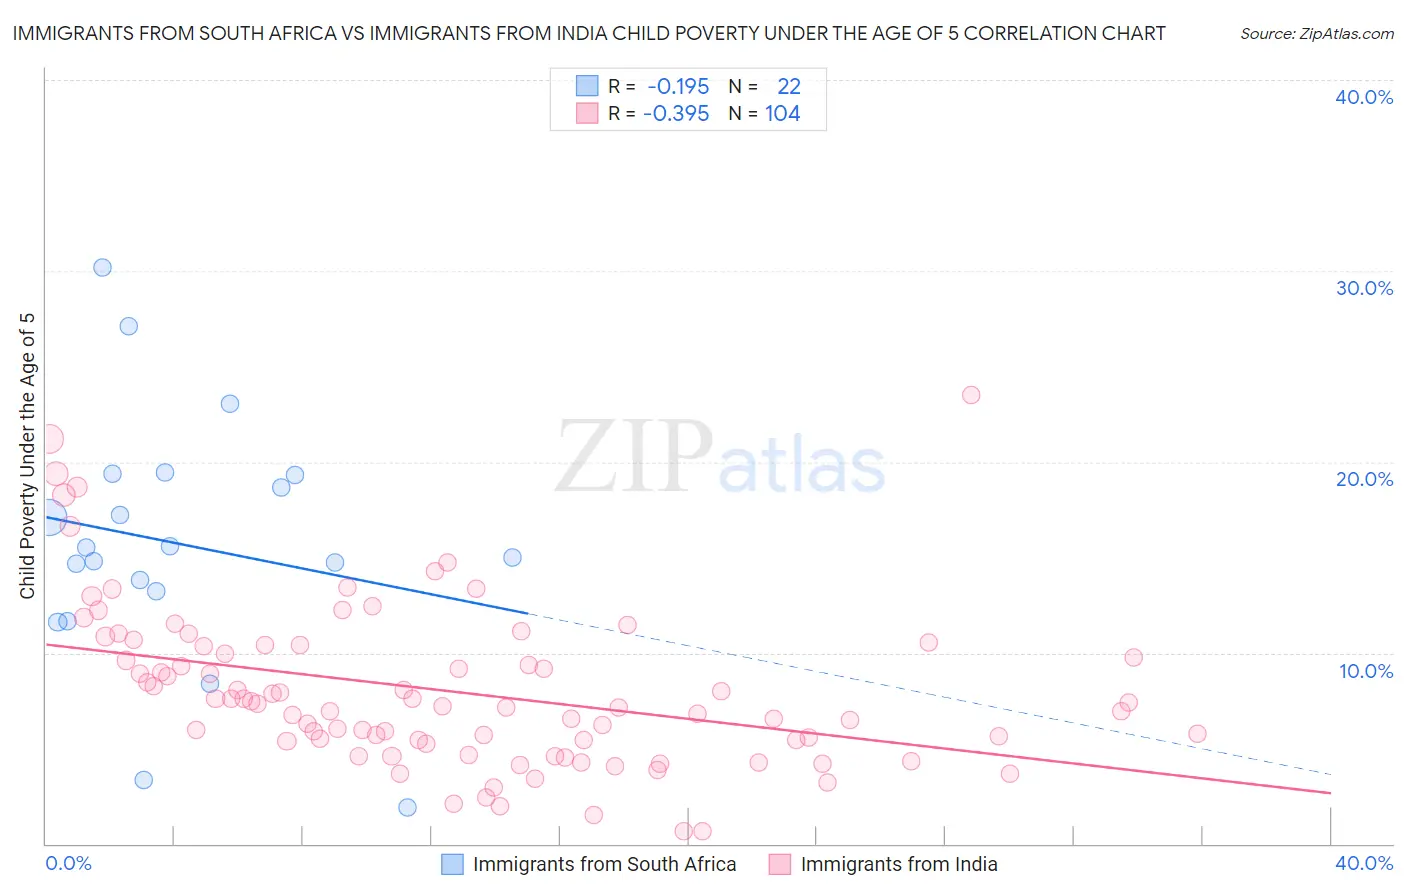 Immigrants from South Africa vs Immigrants from India Child Poverty Under the Age of 5